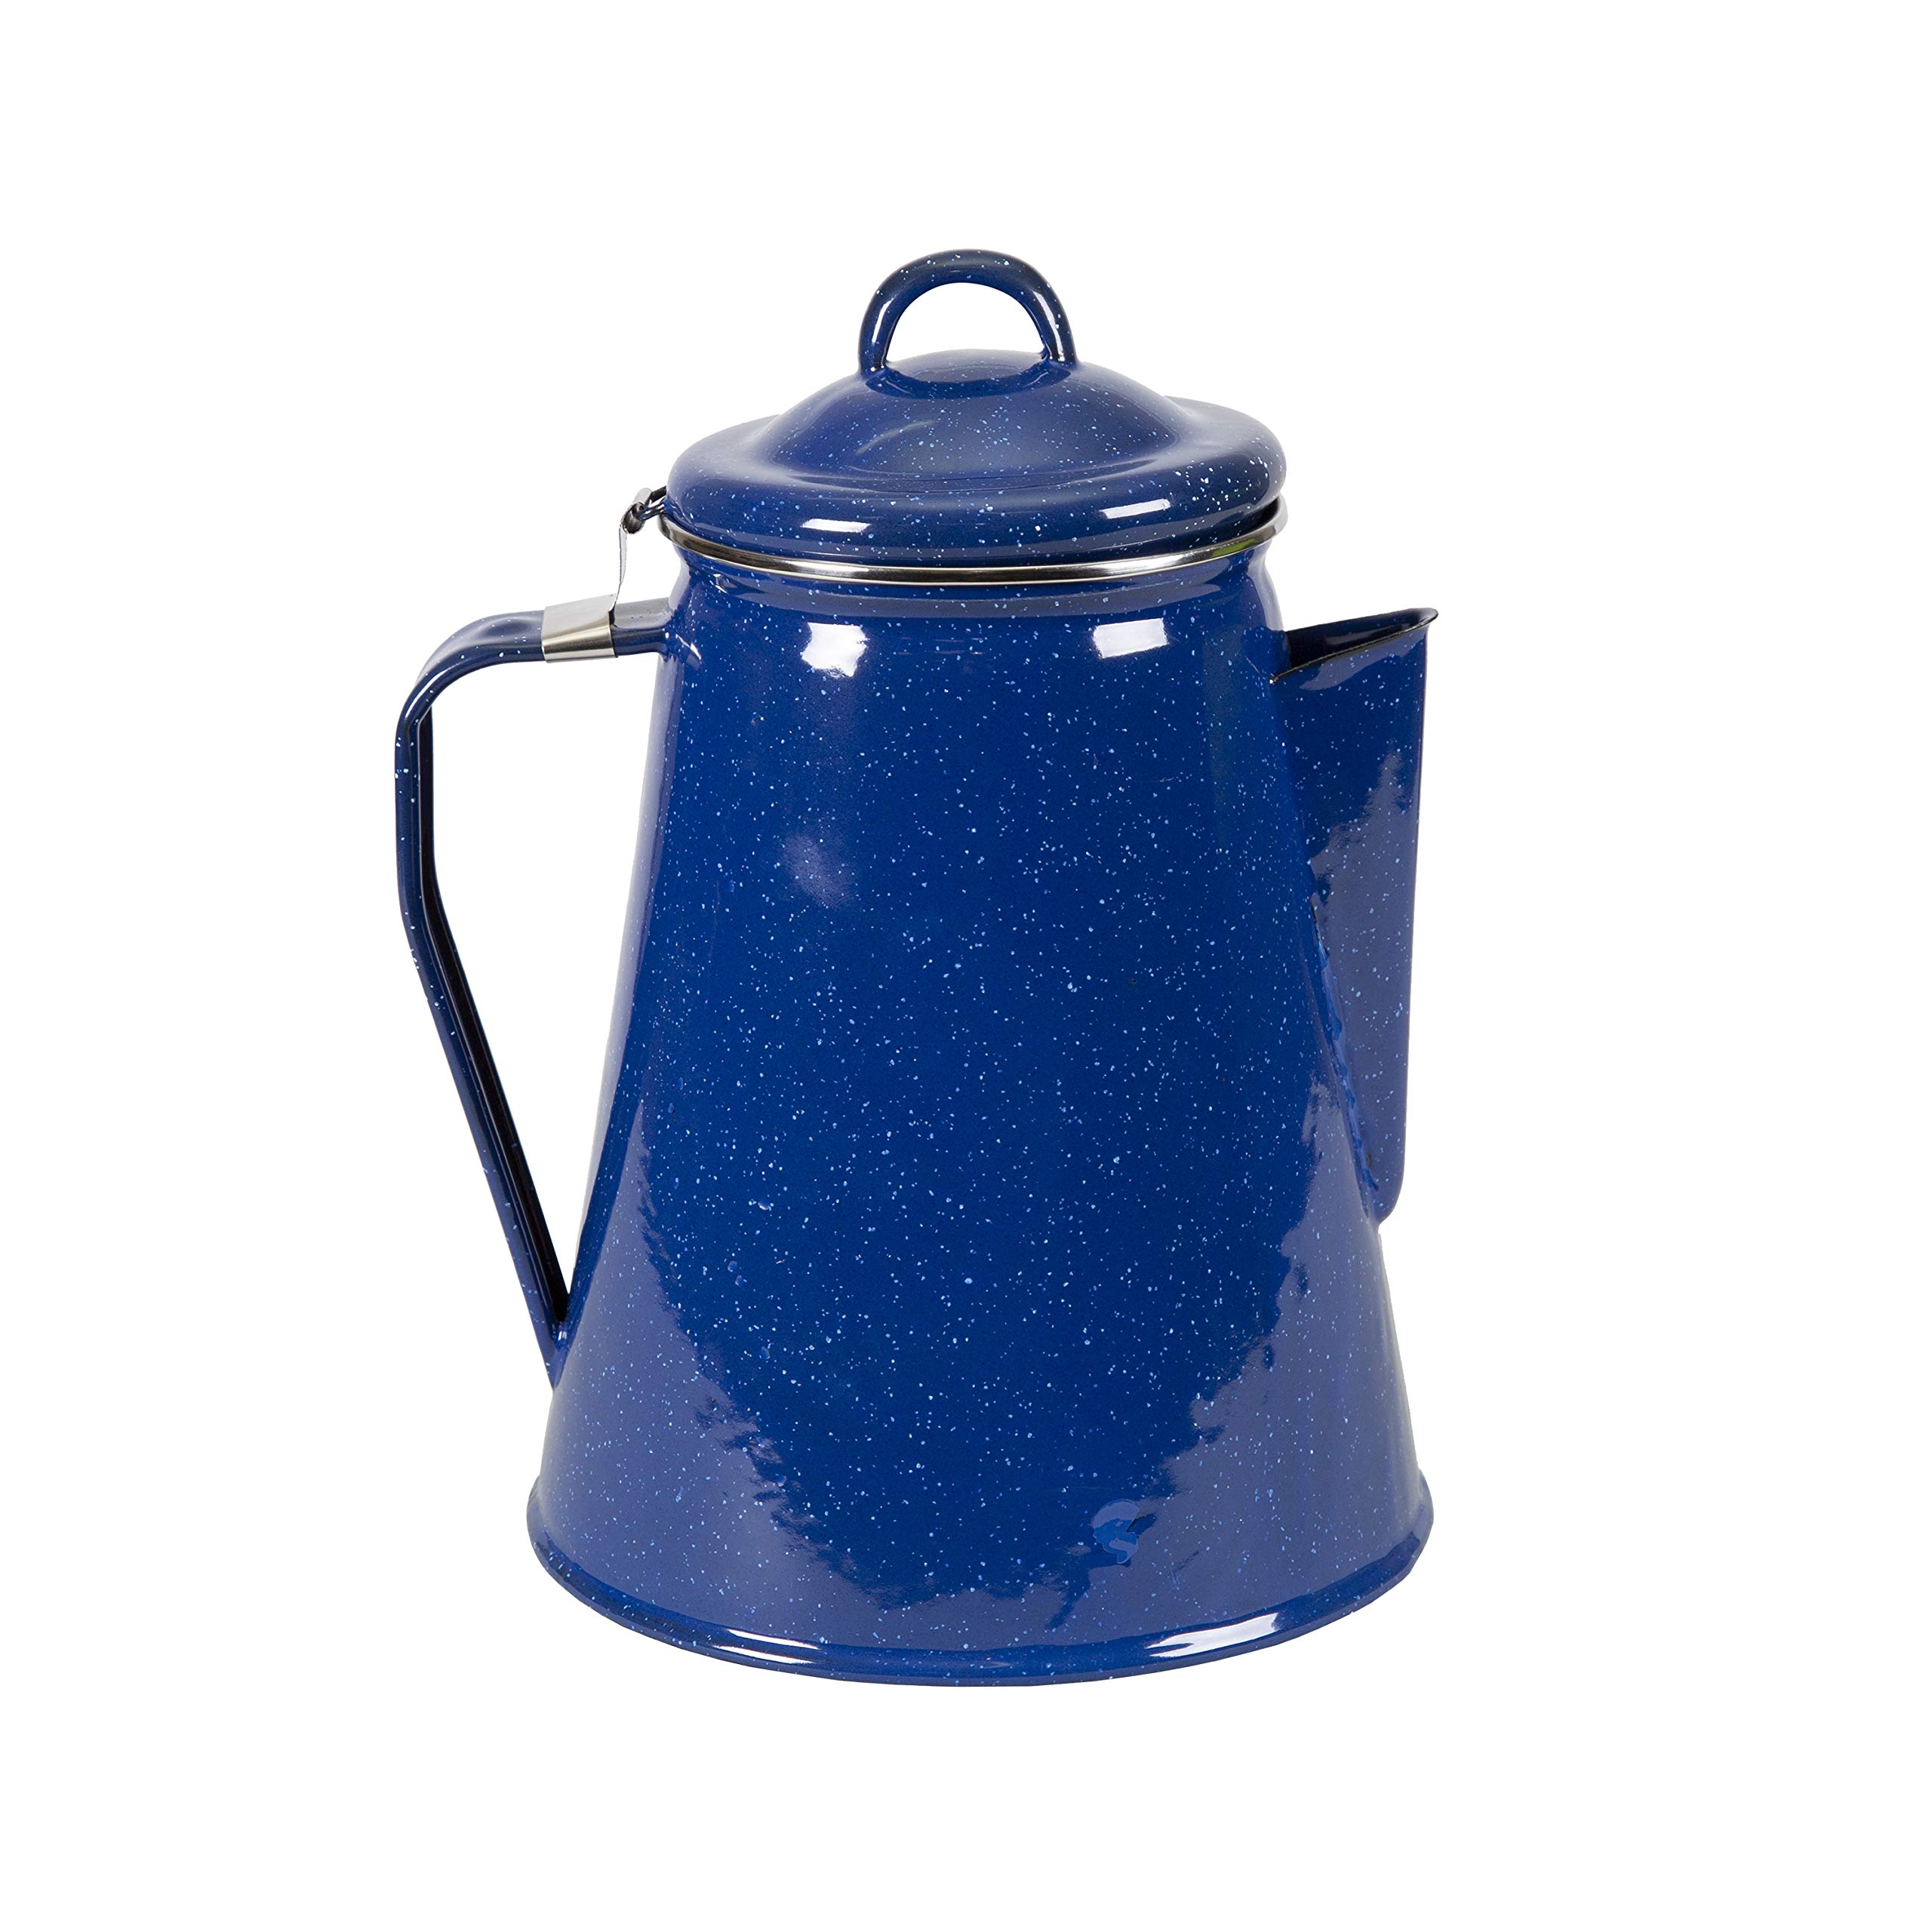 Book Cover Stansport 8 Cup Percolator Enamel Coffee Pot with Basket, Blue (10343)